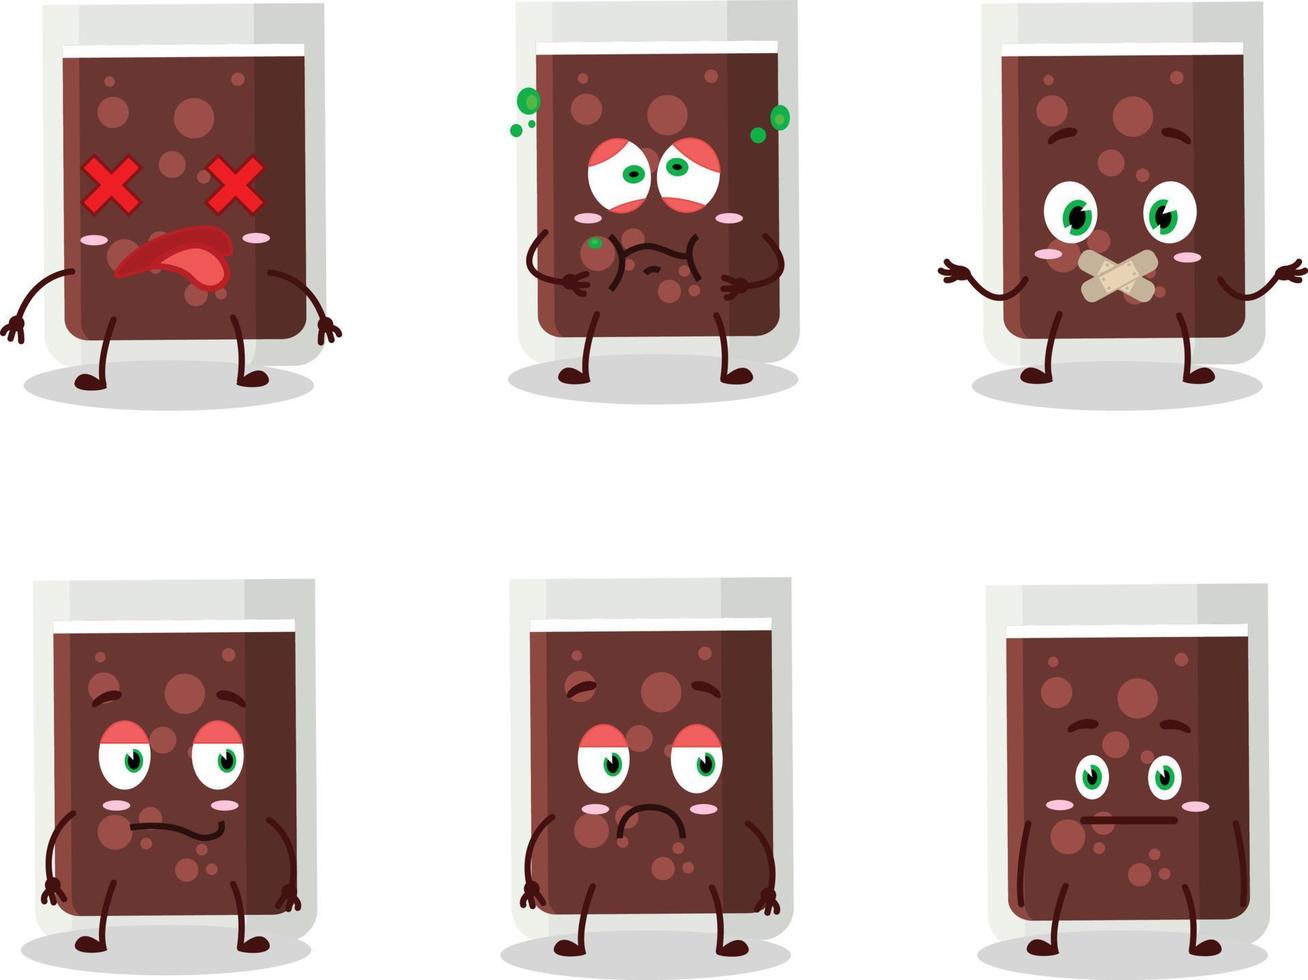 Glass of cola cartoon character with nope expression vector